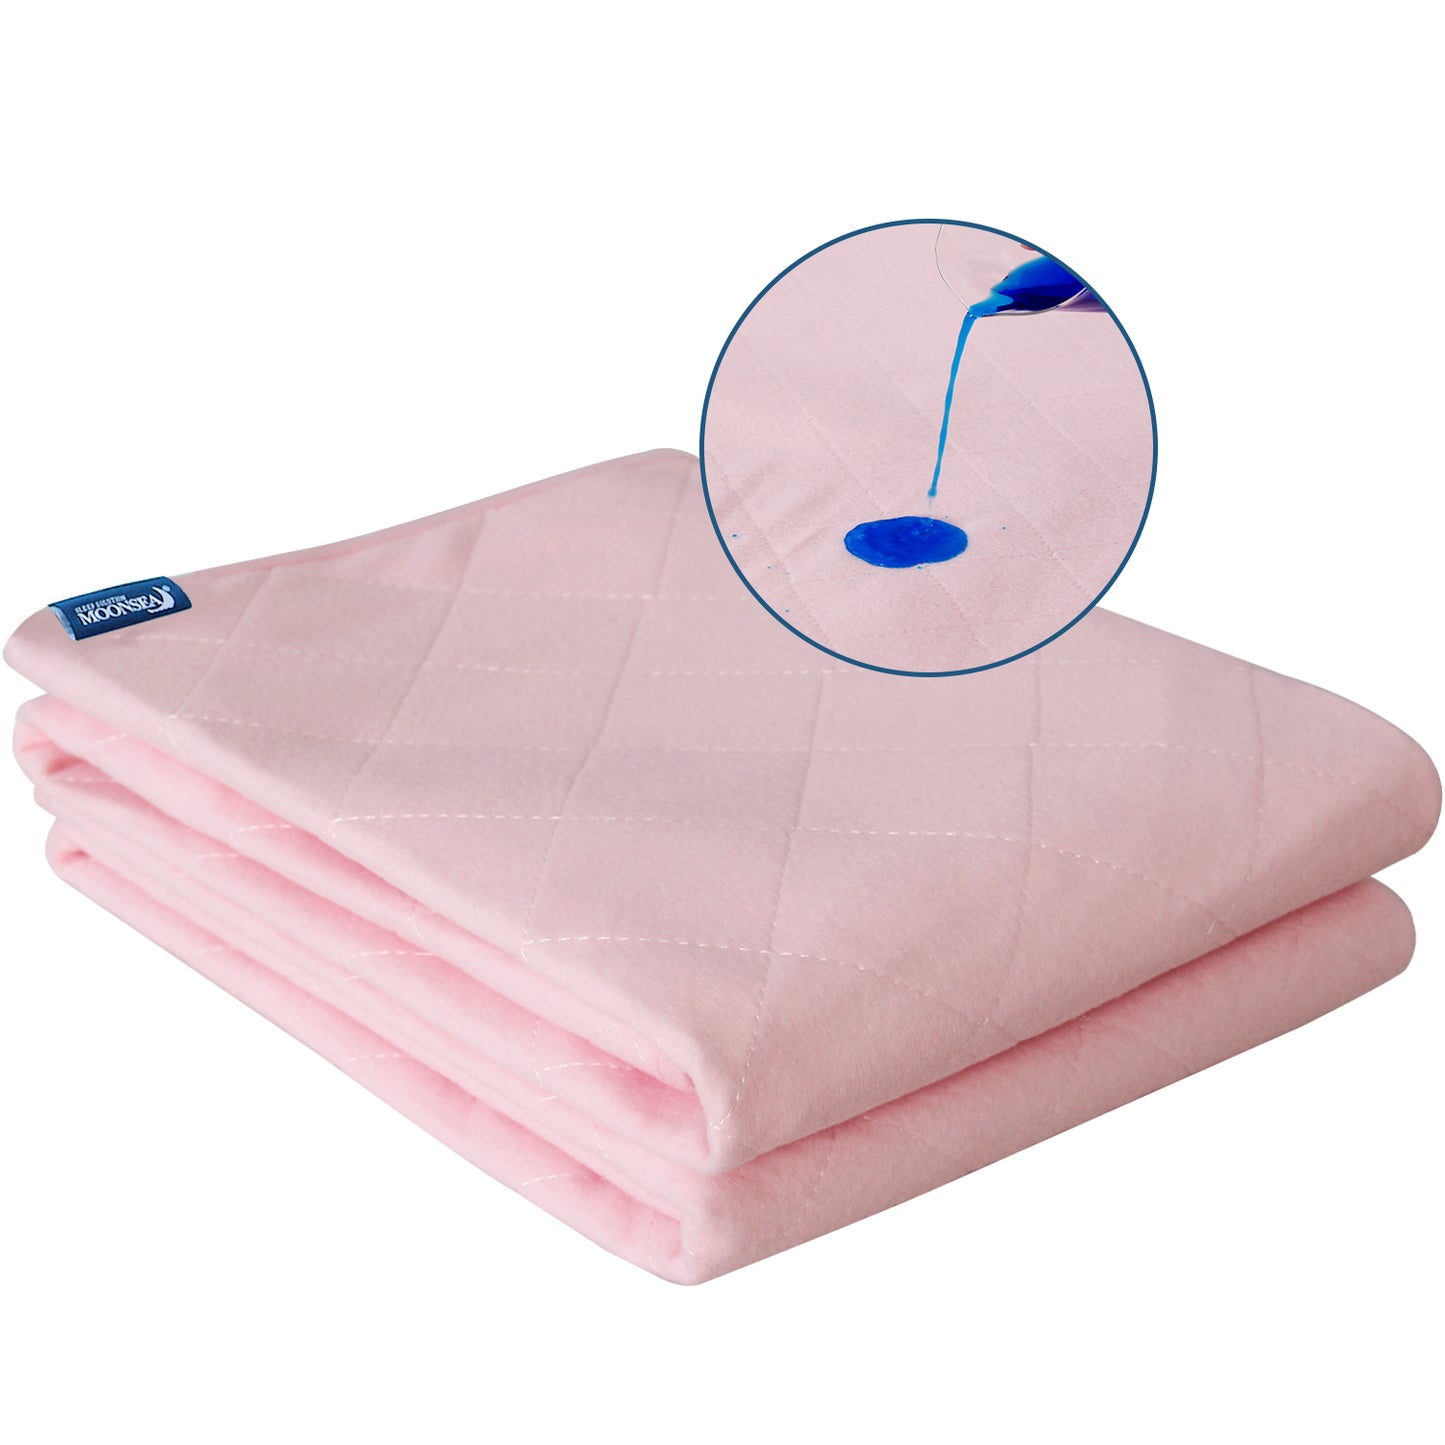 3 NEW BED PADS REUSABLE UNDERPADS USA MADE 34x36 PINK INCONTINENCE WASHABLE